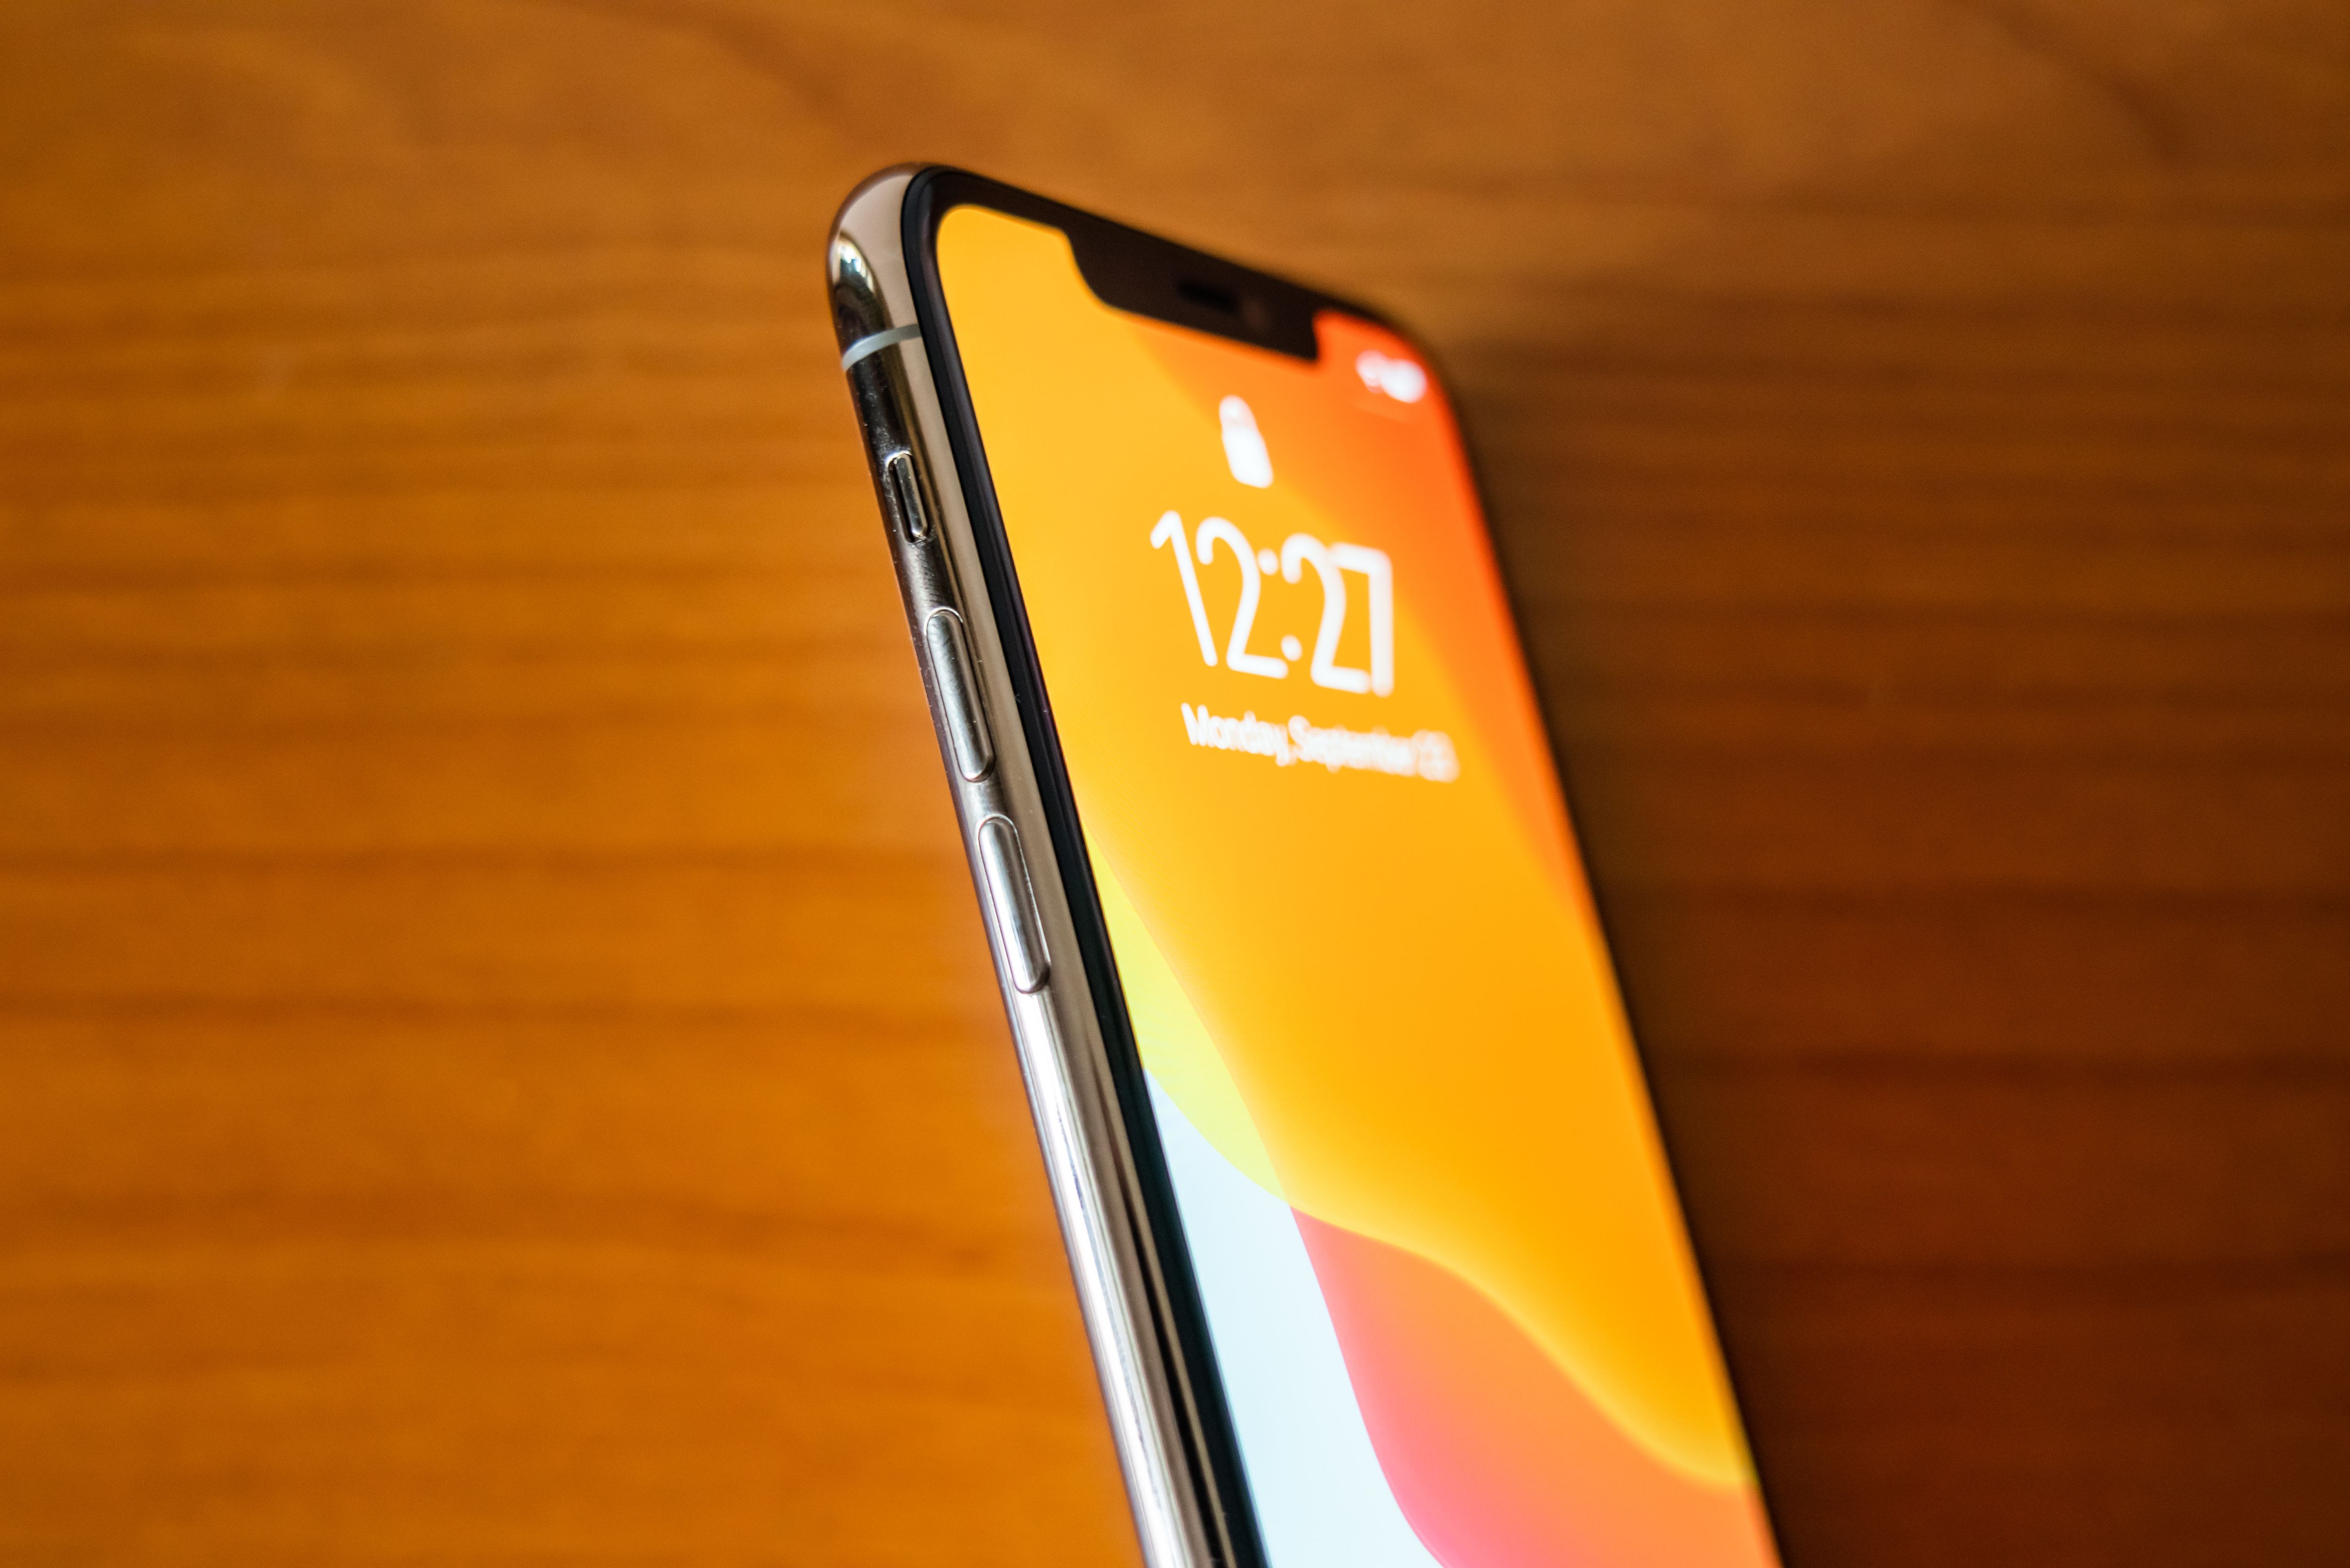 iPhone 11, iPhone 11 Pro and iPhone 11 Pro Max: The reviews are in